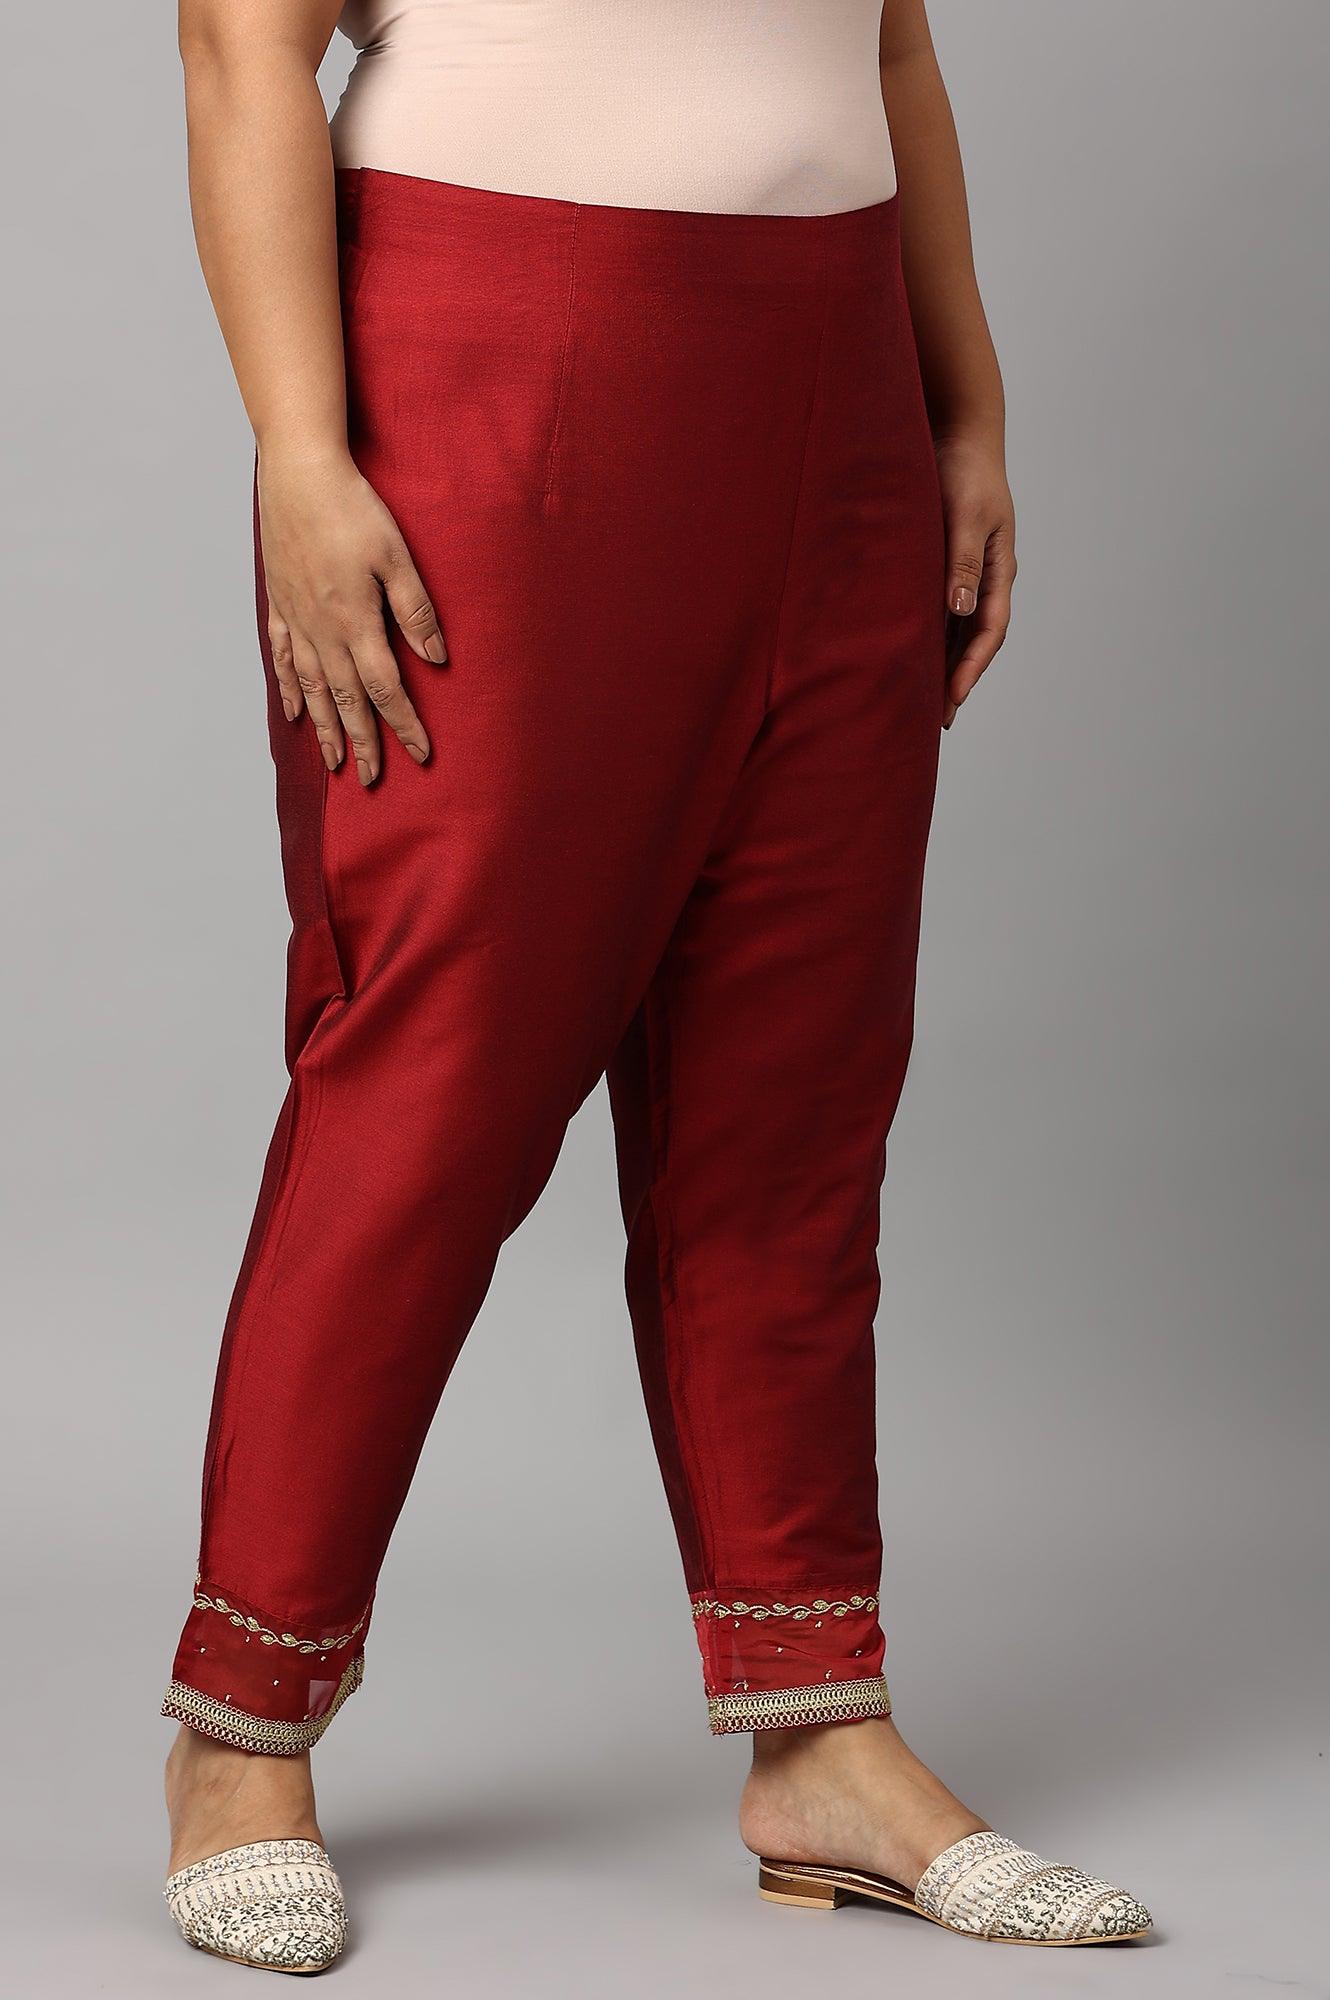 Red Embroidered Light Festive Plus Size Slim Pants - wforwoman